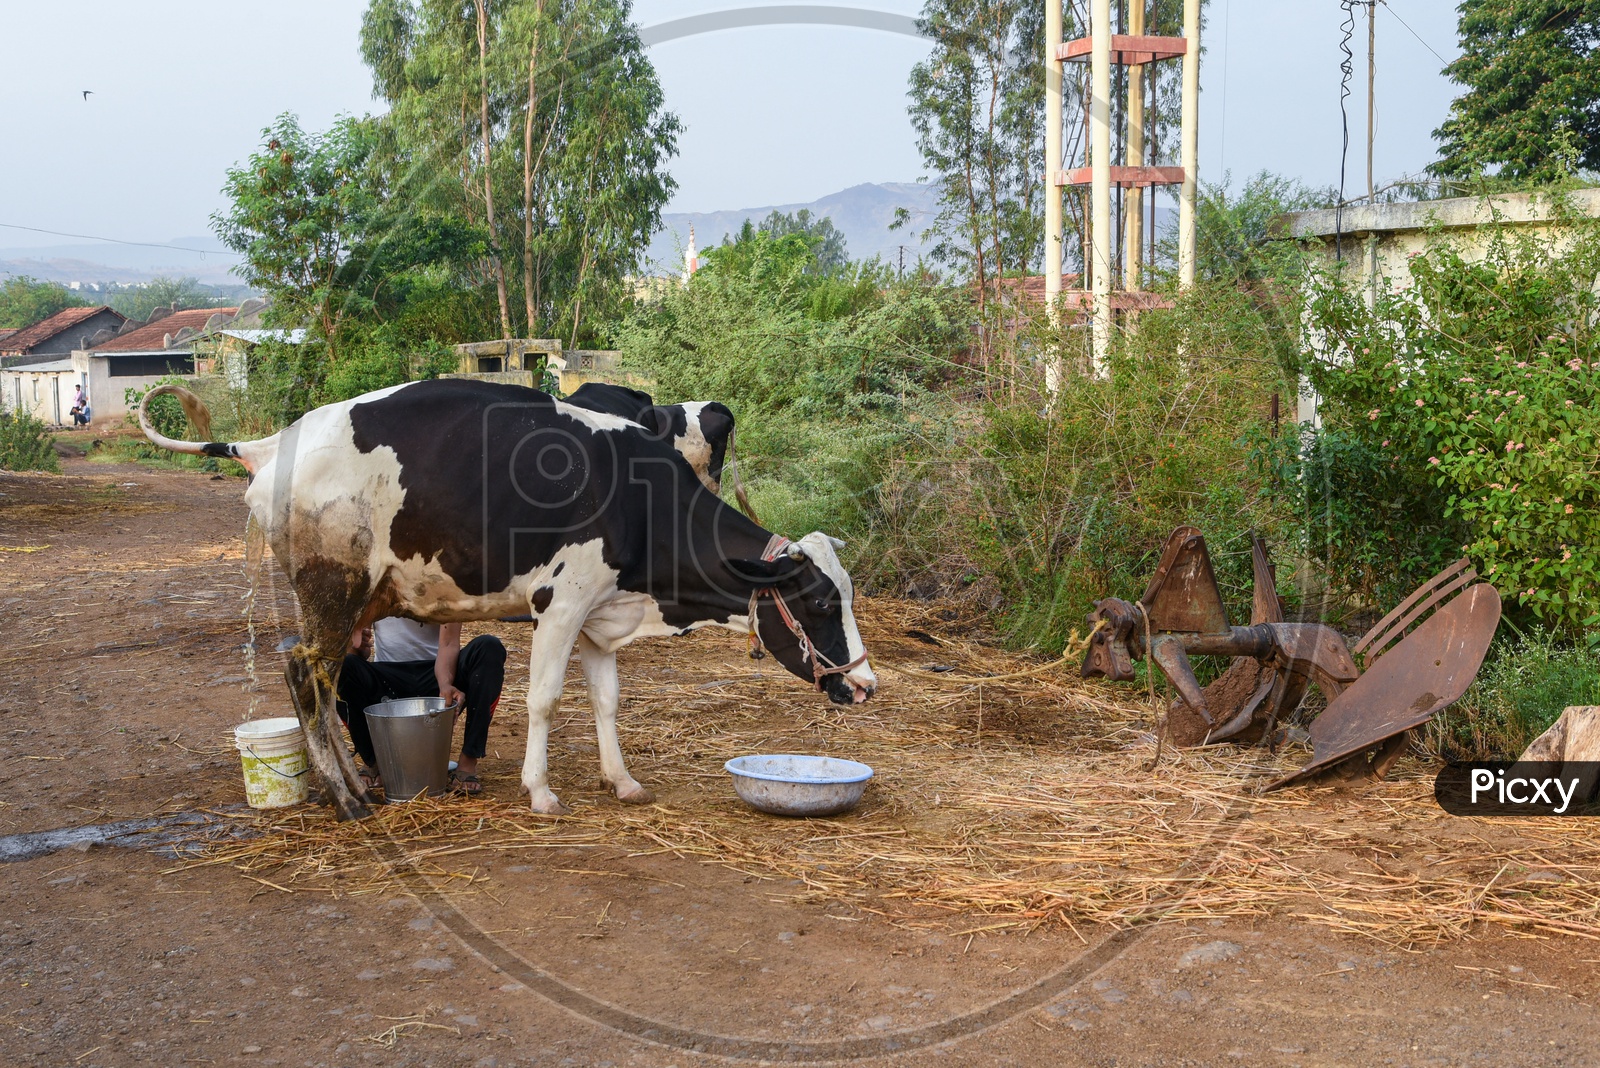 Milking a Cow in a village in Maharastra